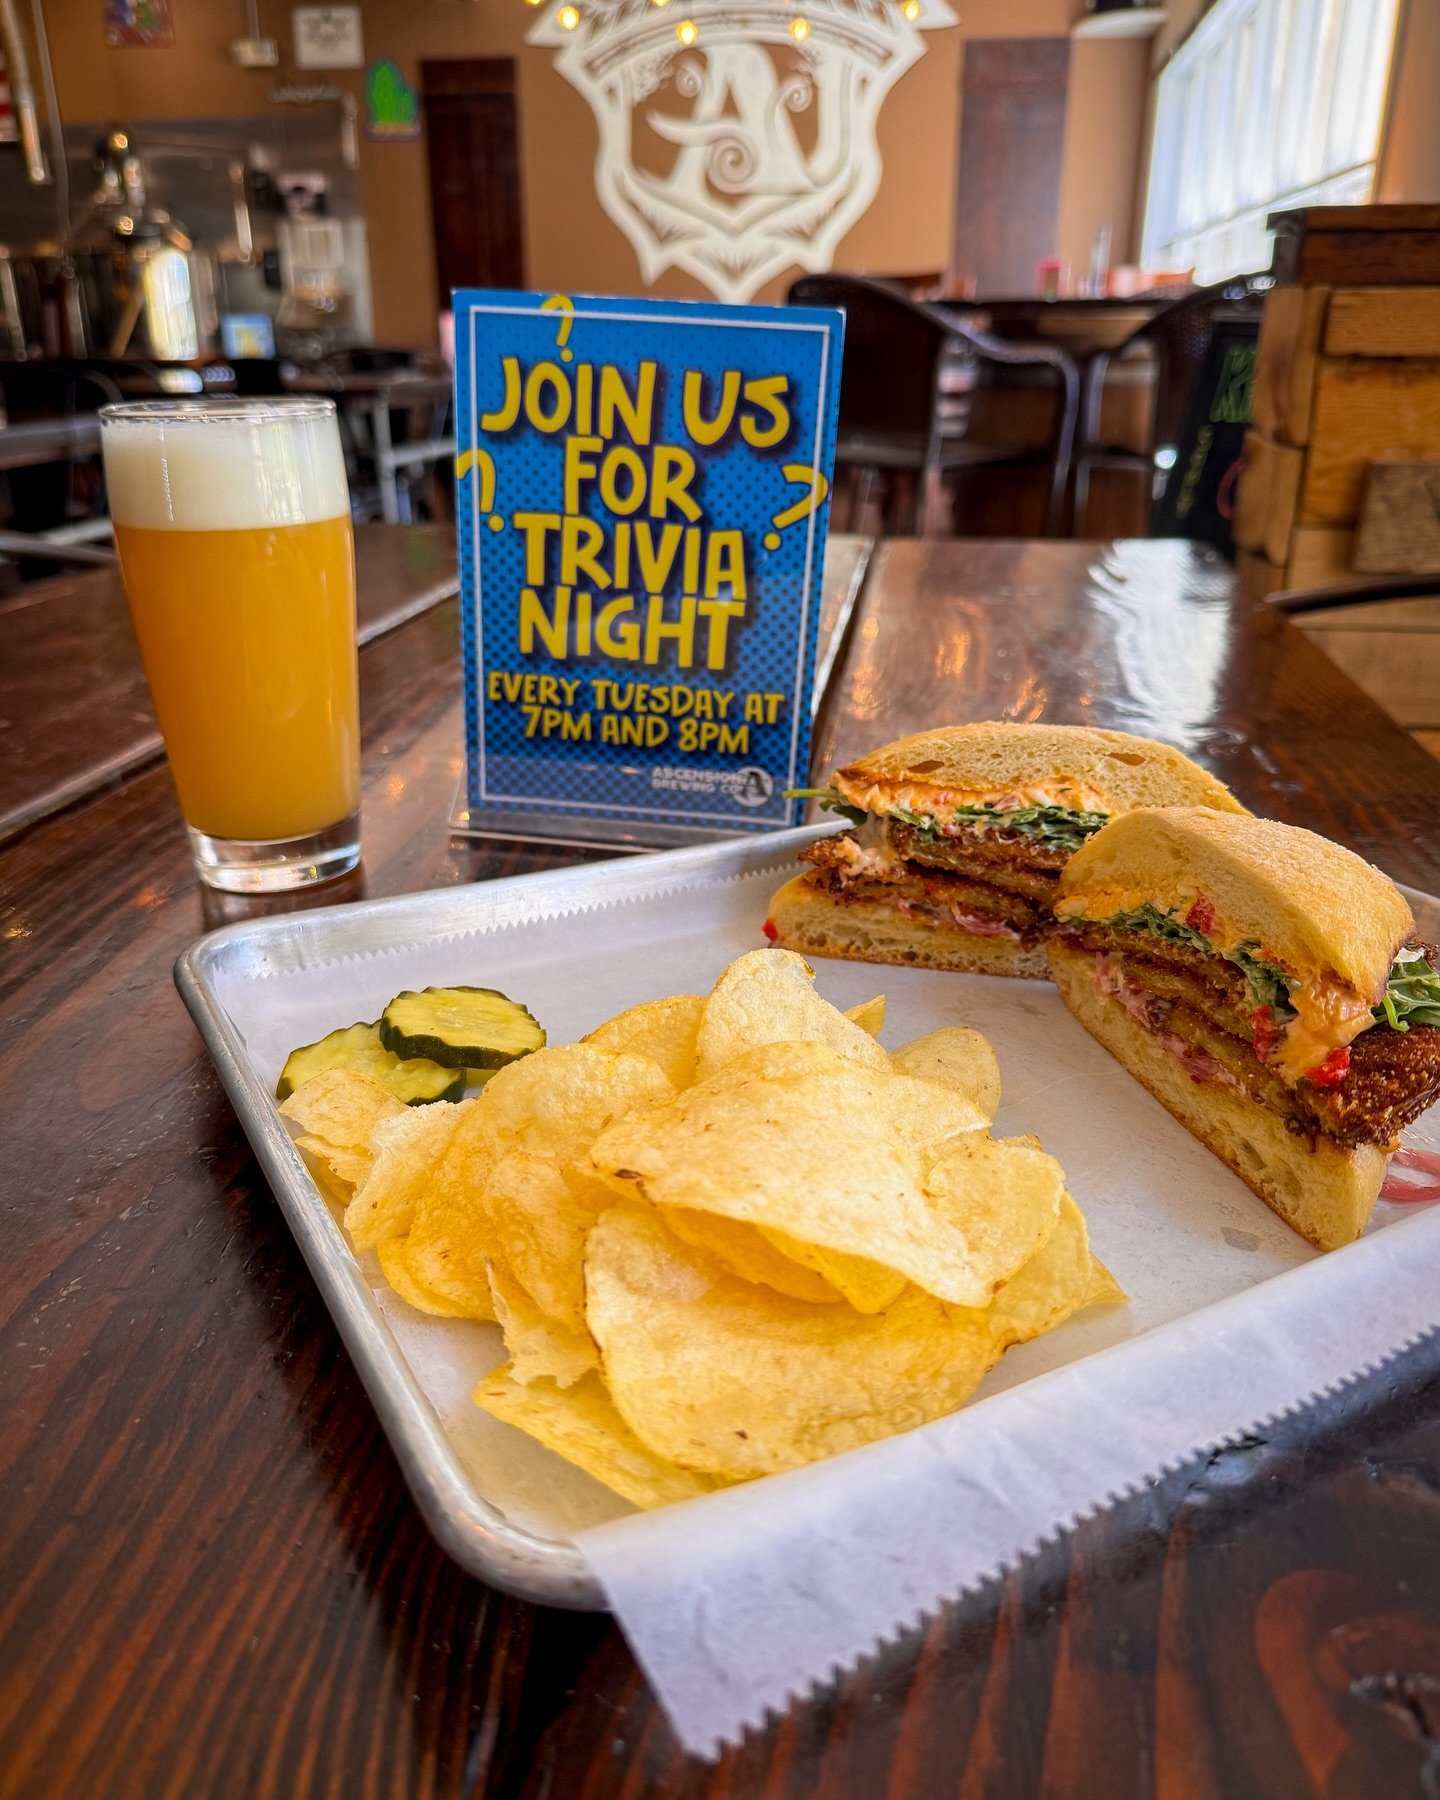 Trivia night AND a new special from the mind of Chef Marc? C&rsquo;mon&hellip;. Who loves ya, baby?!?

Our FRIED GREEN TOMATO SANDWICH is a Vegetarian option with Fried Green Tomato, Pimiento Cheese, Arugula, Pickled Red Onion, Garlic Sauce and Cajun